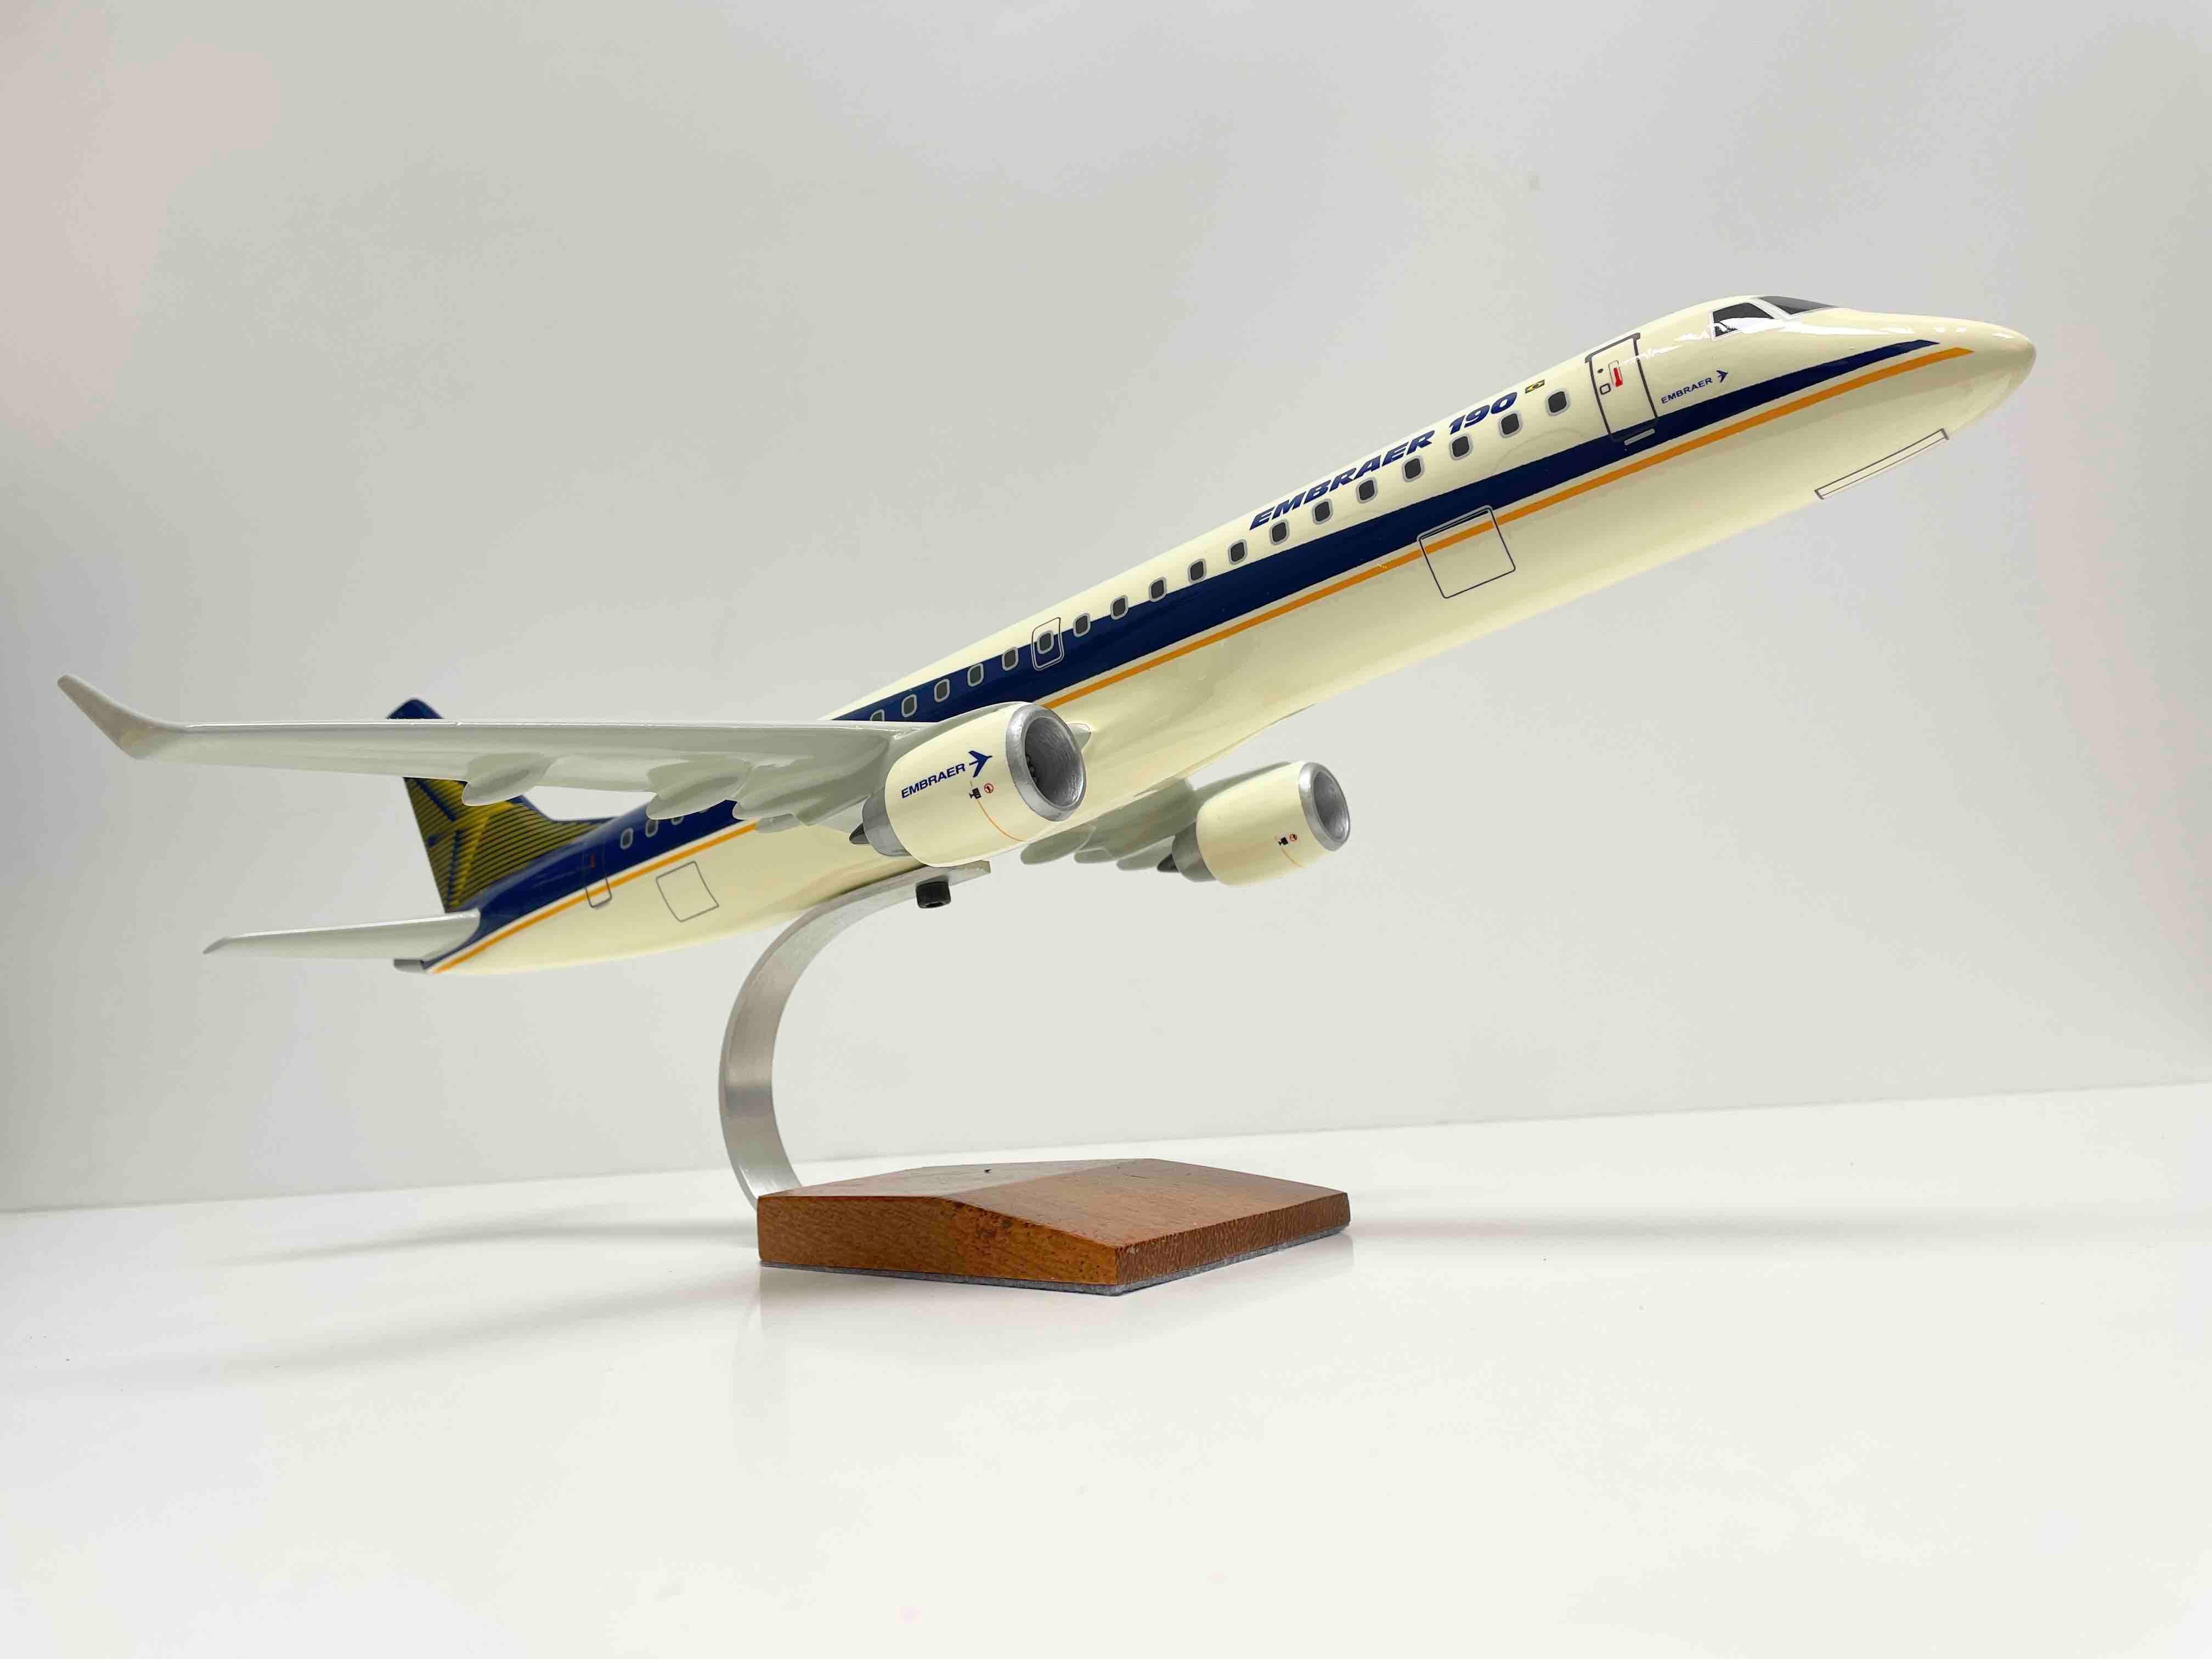 Brazilian Embraer 190 Jet Airplane Aircraft Model Brazil For Sale